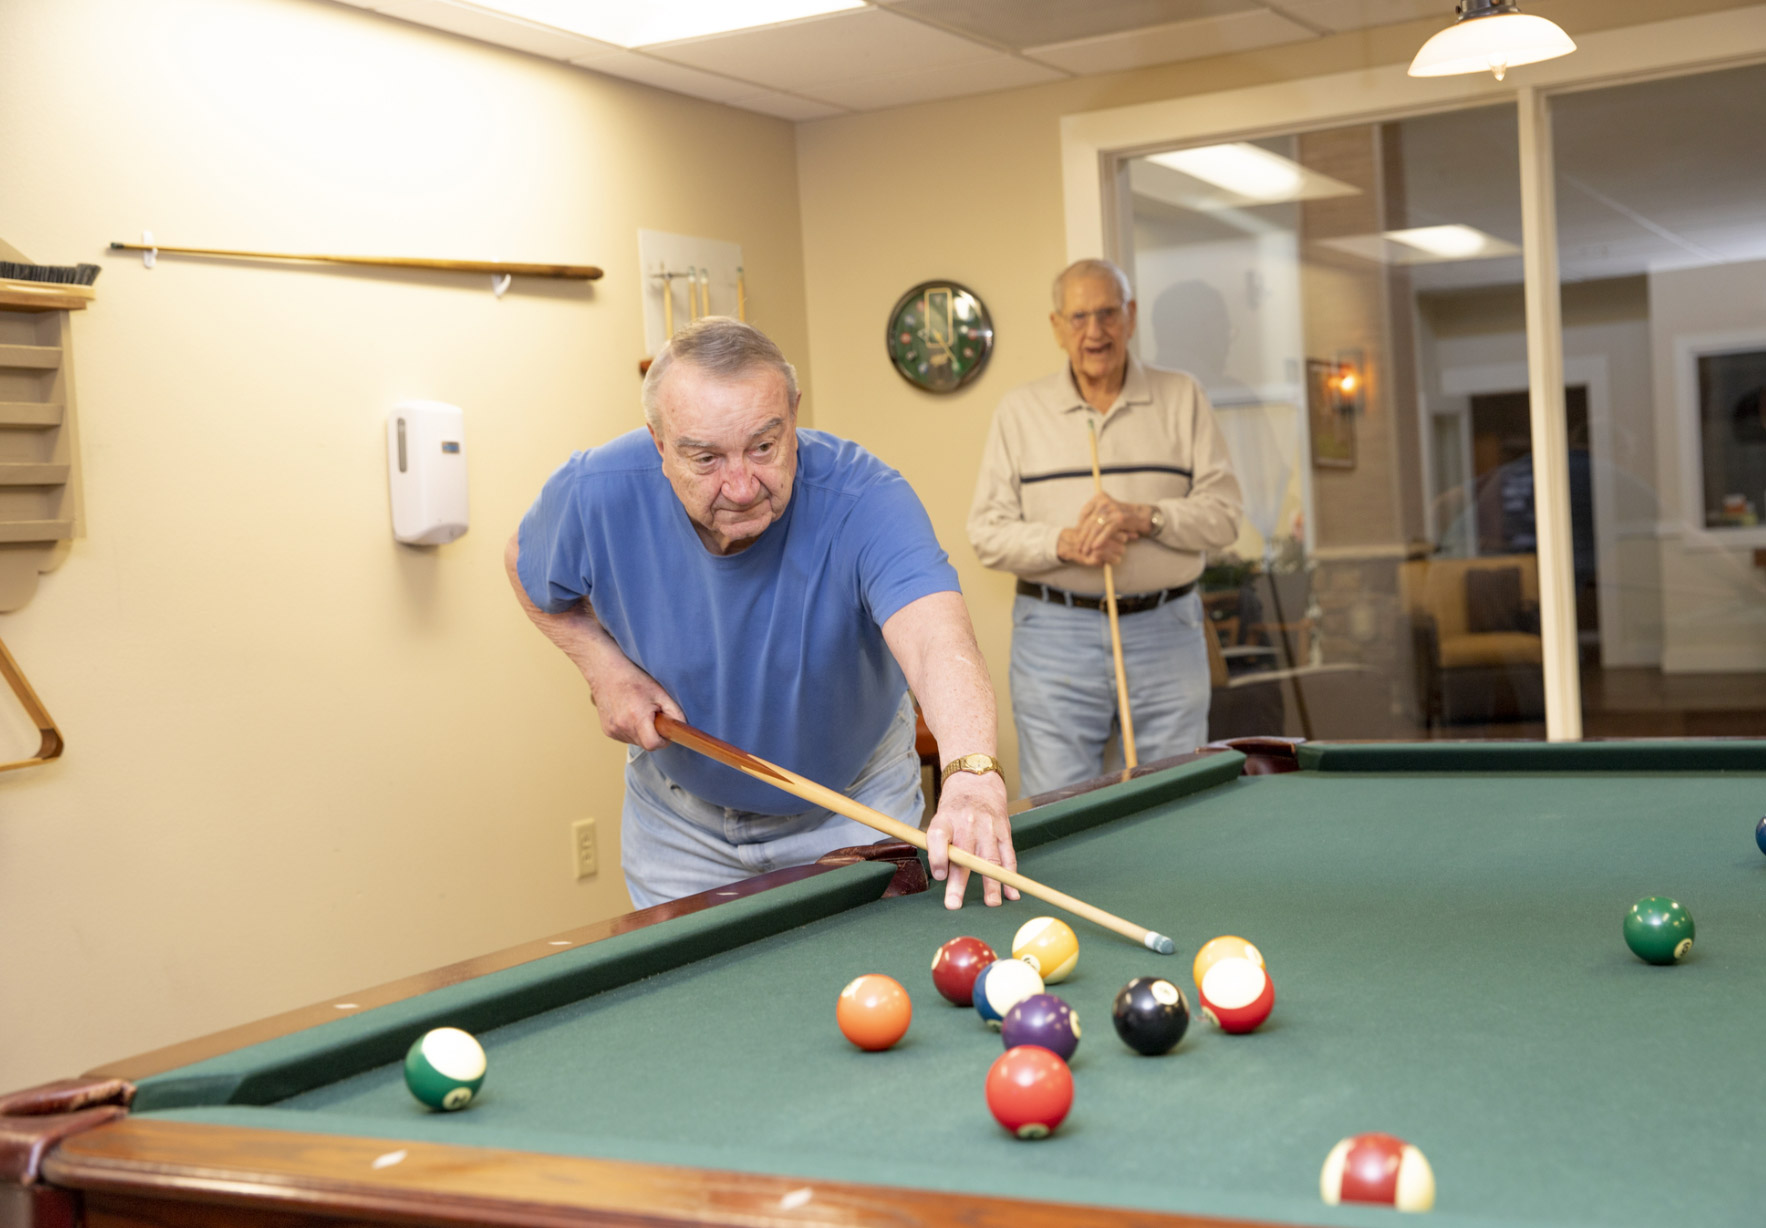 4 Exciting Senior Social Clubs You Should Consider Joining